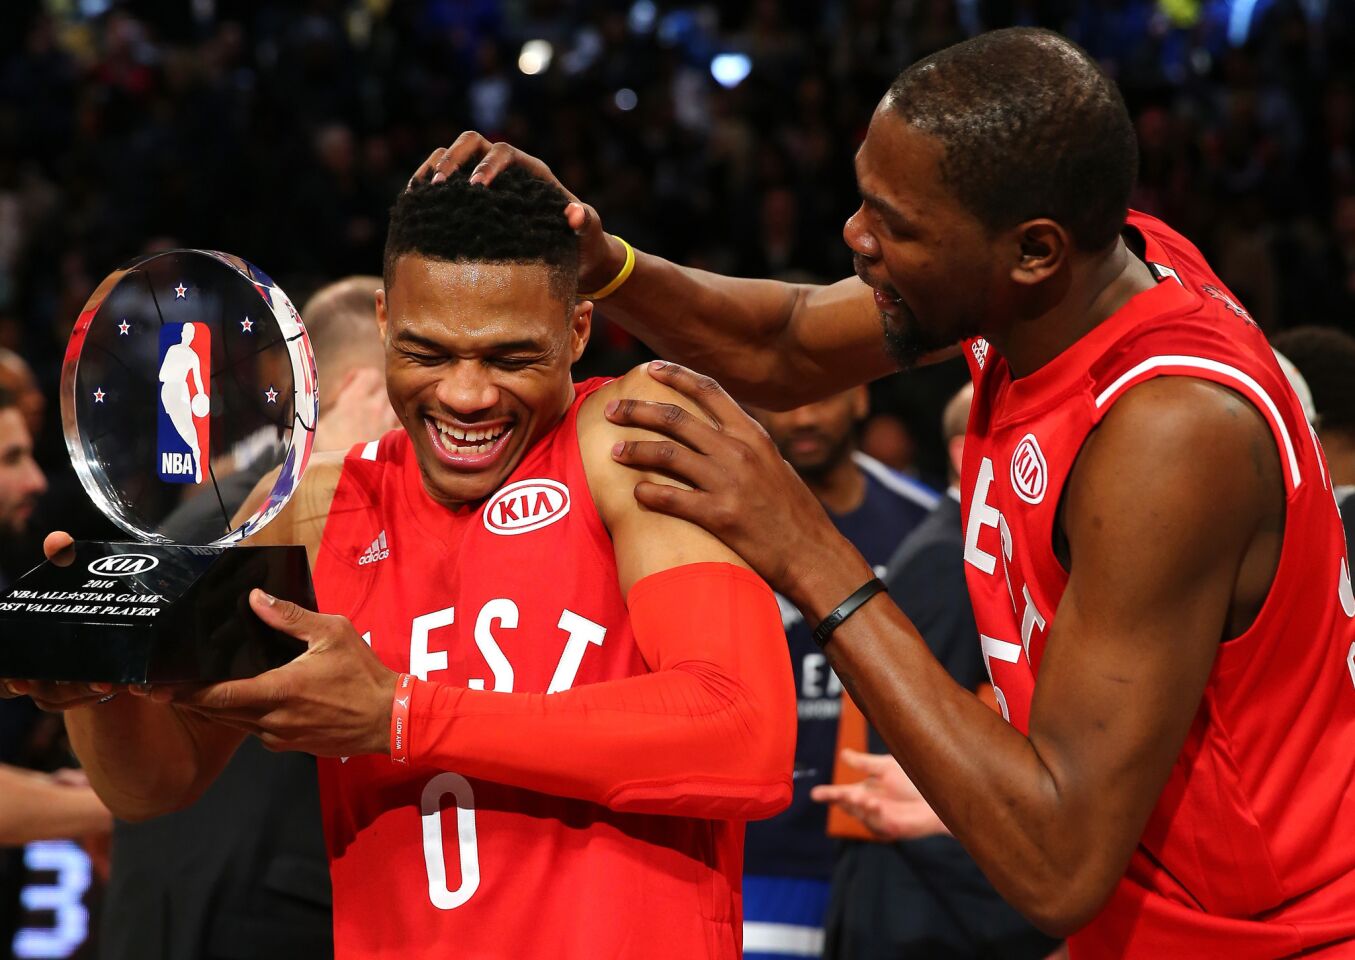 Thunder guard Russell Westbrook is congratulated by teammate Kevin Durant after winning the All-Star game MVP award.